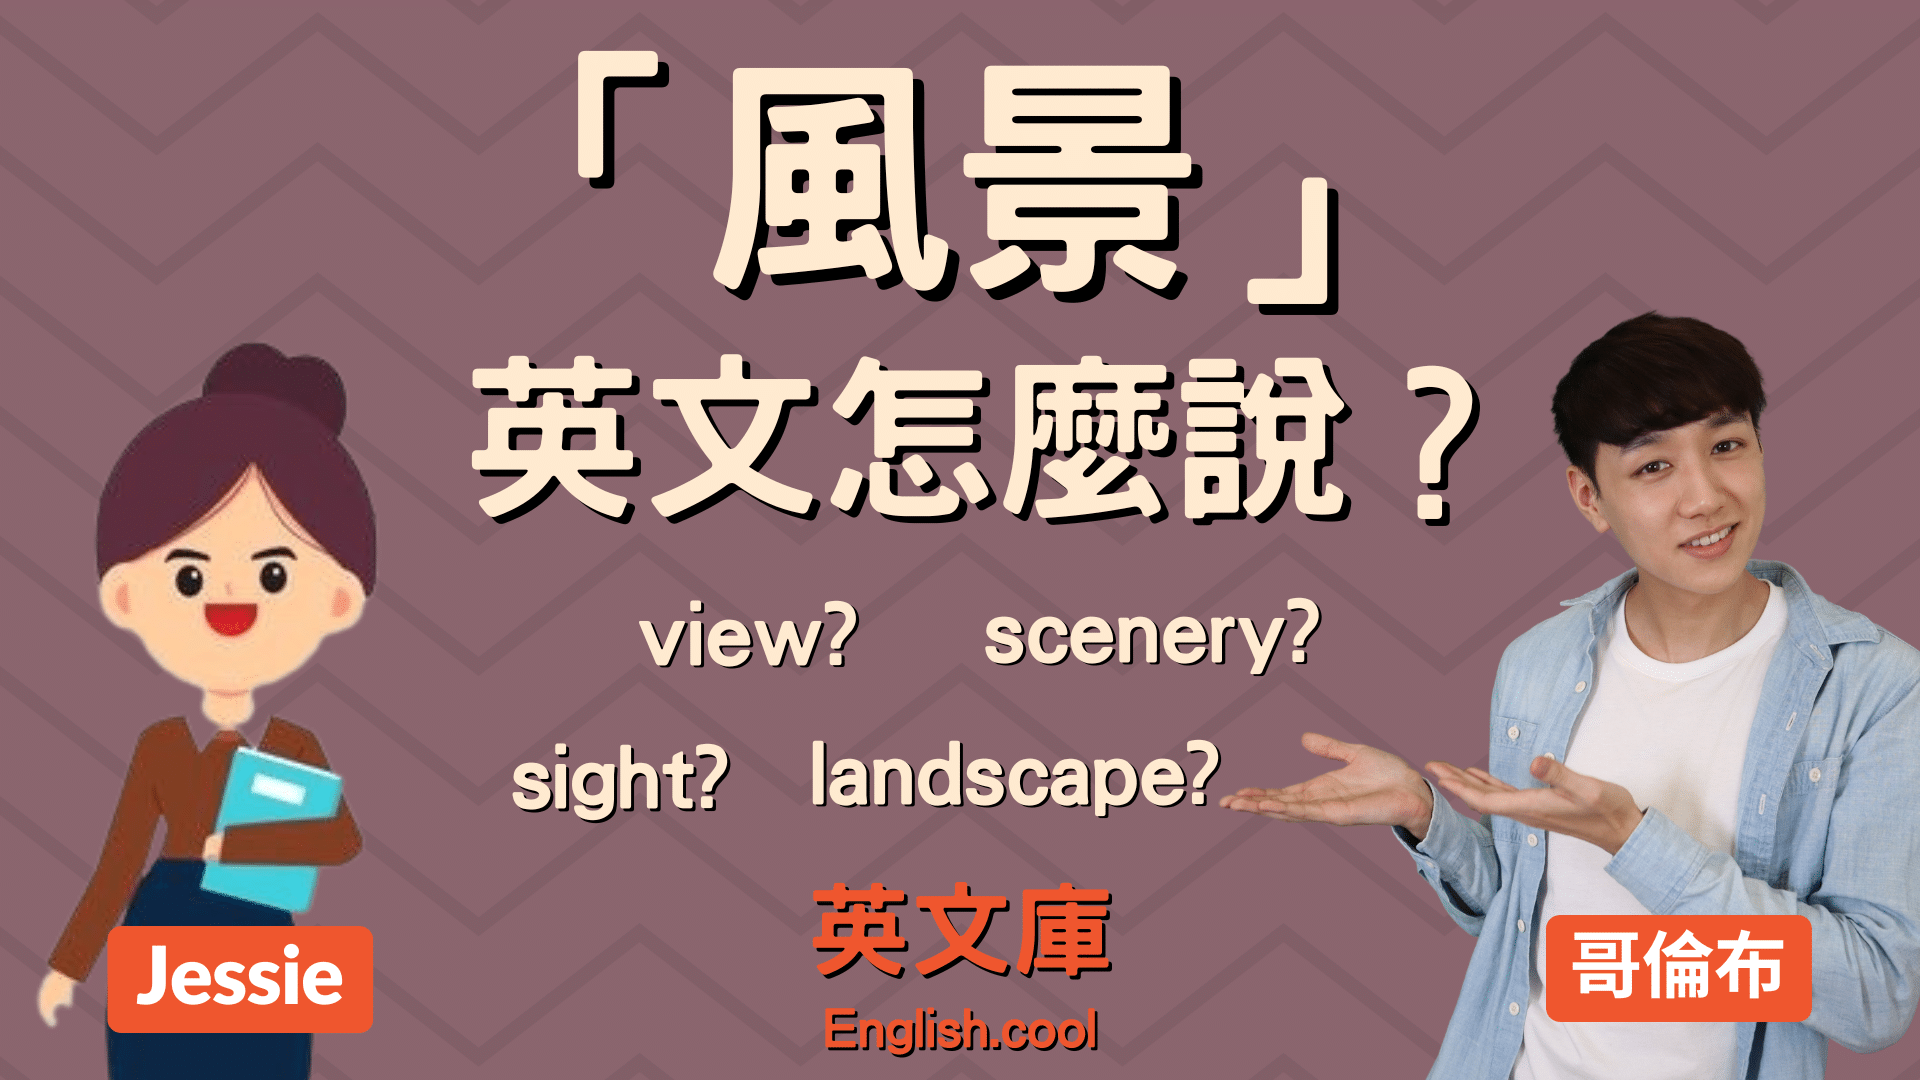 You are currently viewing 「風景」英文怎麼說？view? sight? scenery? landscape?